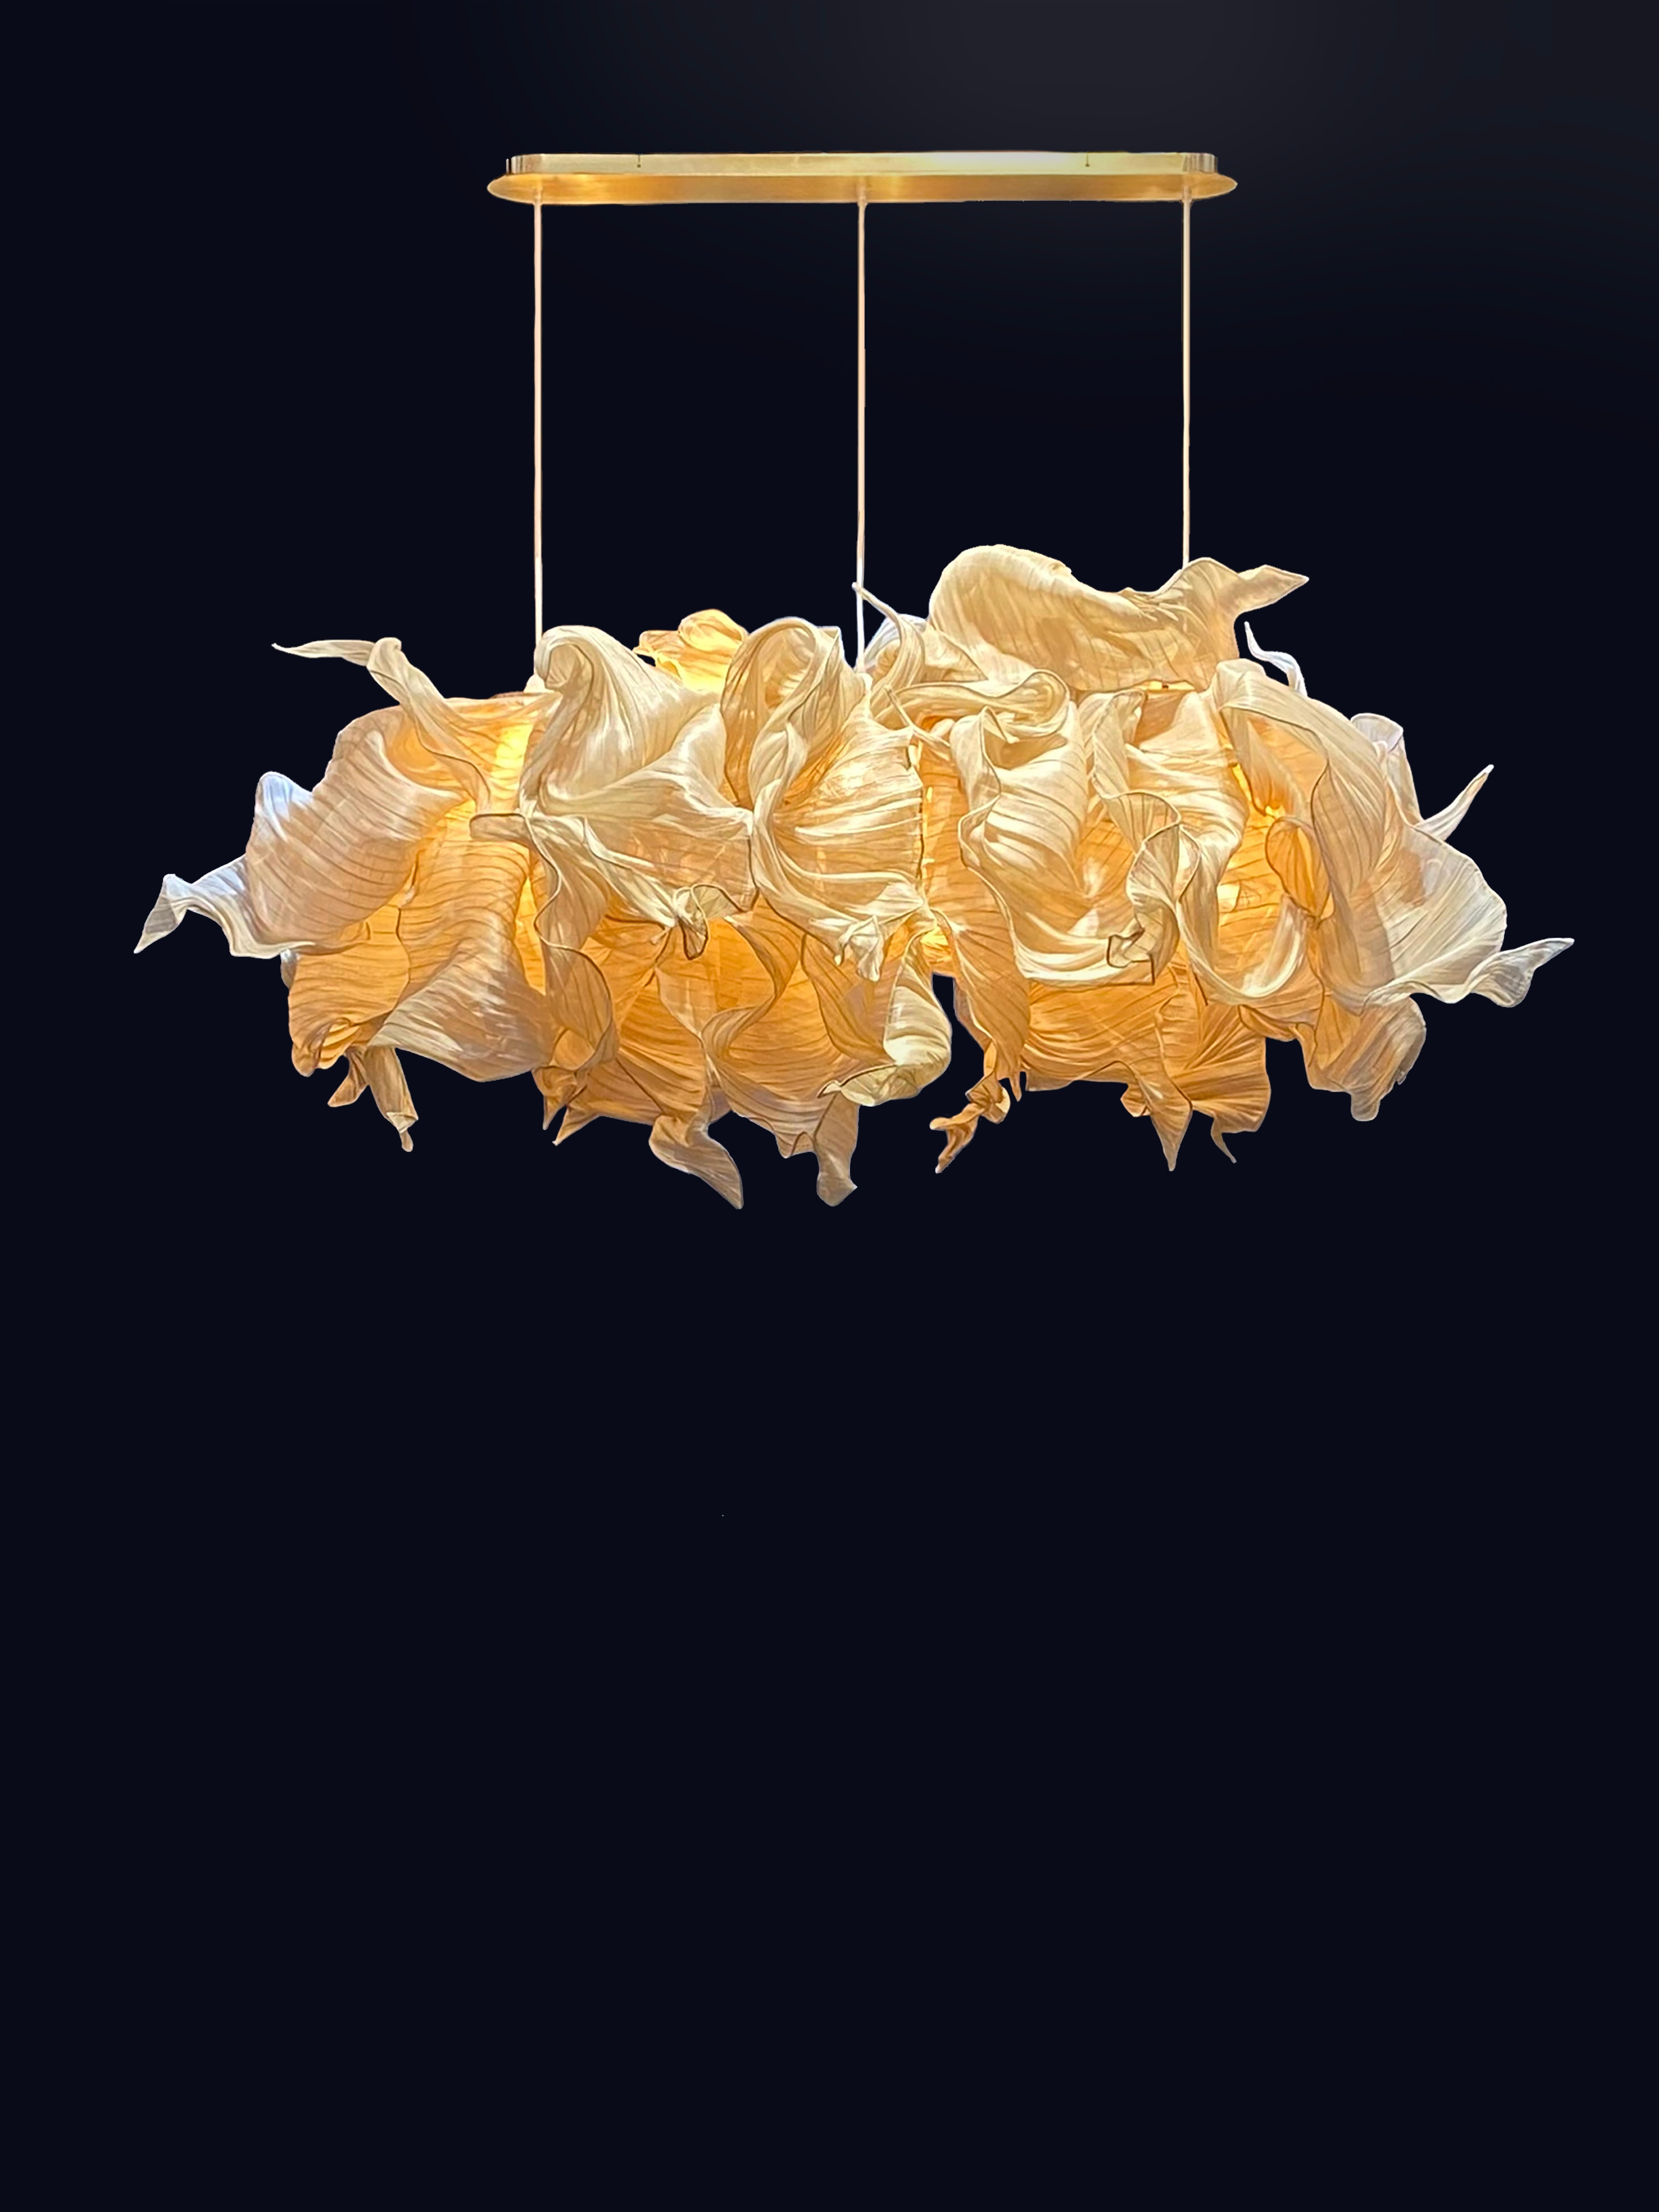 Mirei’s newest and most ambitious design to date debuted at Wanted Design / ICFF 2023 - In Stock 

Measures 39’’ H x 79’’ W

Providing soft light in an organic and unique design, the Supernova Chandelier draws its inspiration from the interstellar